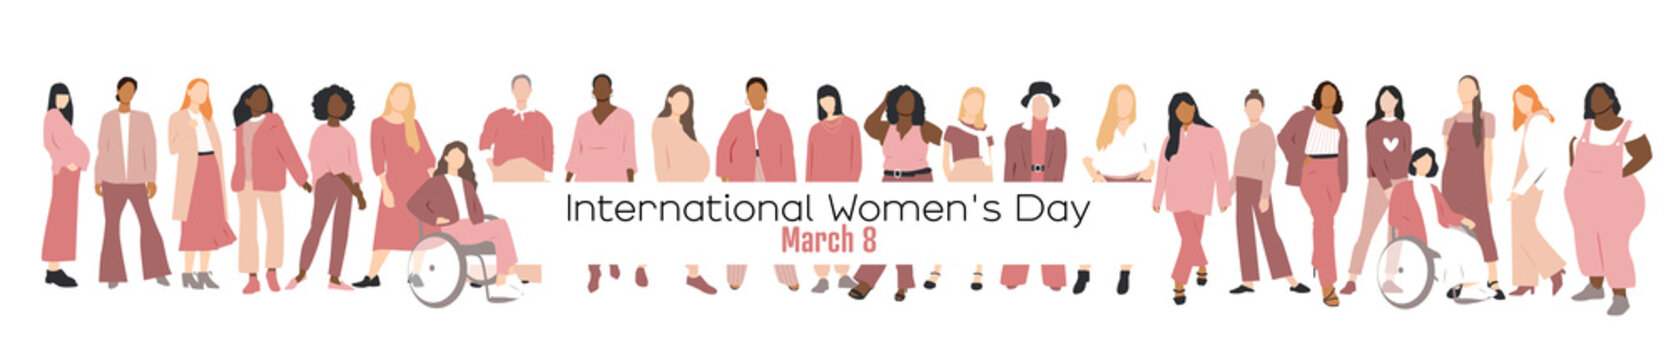 International Women's Day banner. Women of different ethnicities stand side by side together.